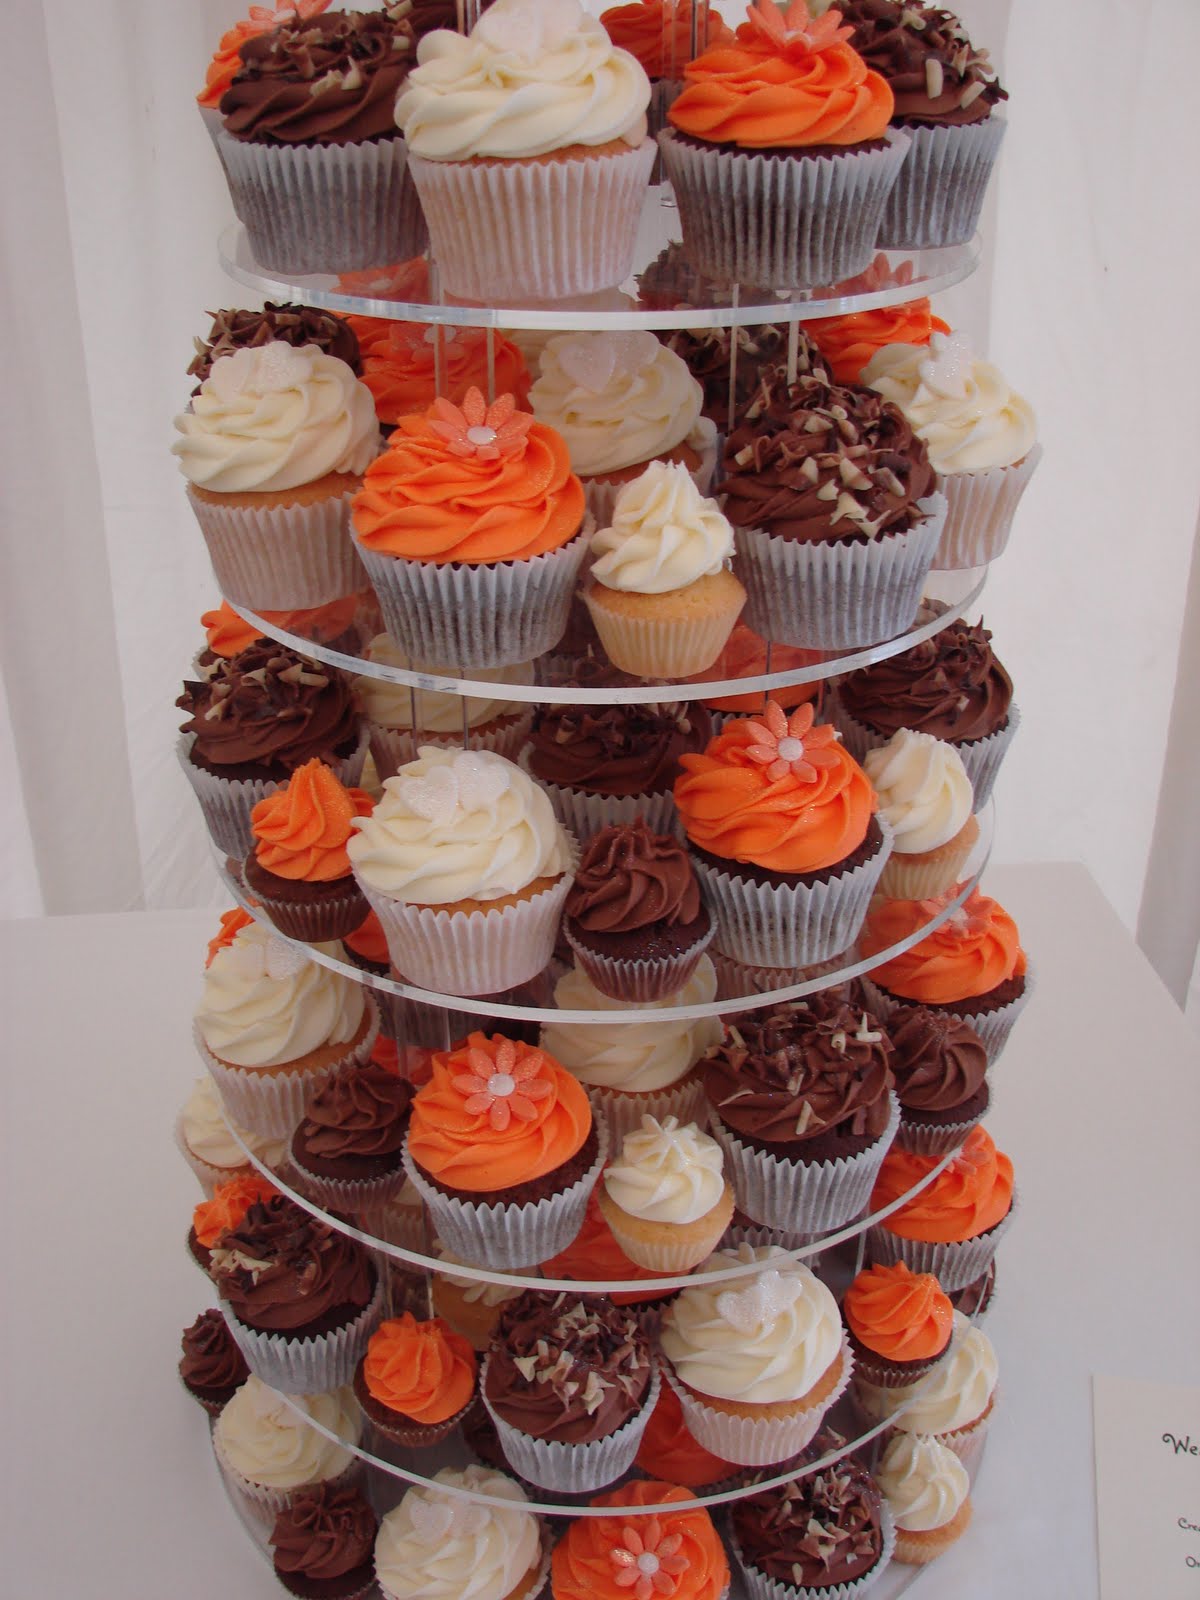 What a beautiful combination of colours for your wedding cupcakes.